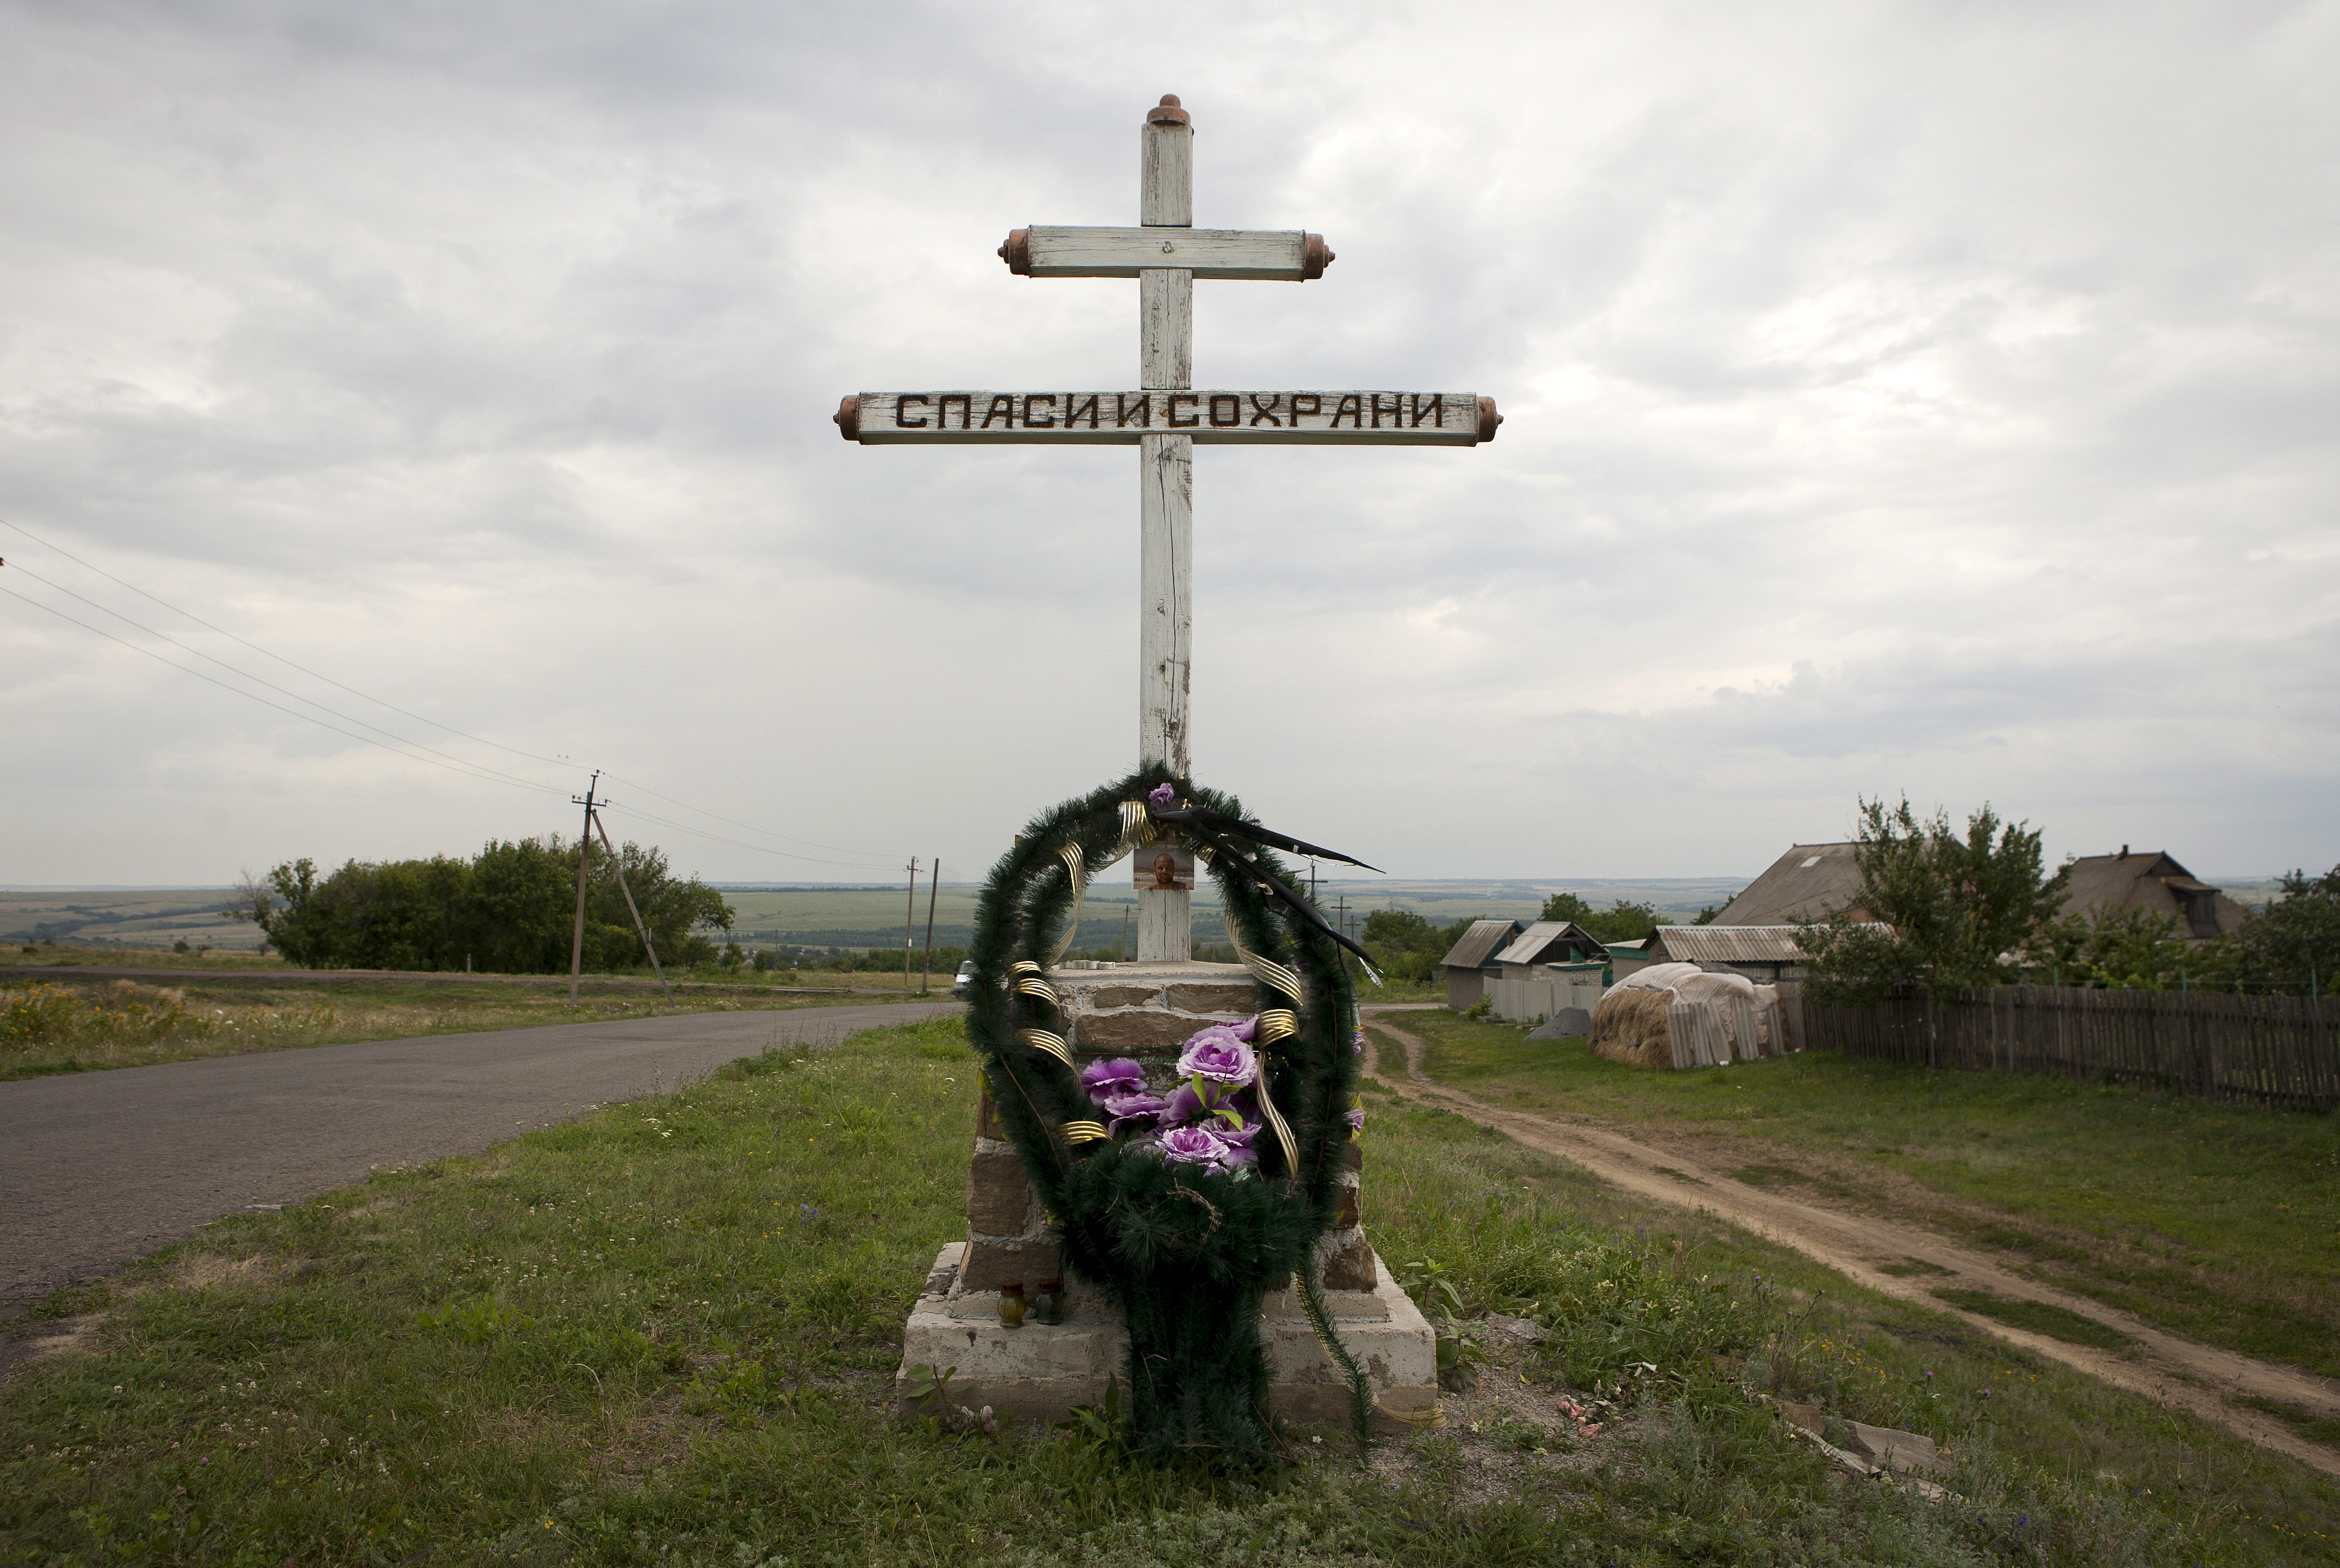 A wreath is placed on a cross with an inscription that reads "Save and protect" next to the site of the downed Malaysia Airlines flight MH17, near the village of Hrabove (Grabovo) in Donetsk region, eastern Ukraine, July 14, 2015. (Kazbek Basayev—Reuters)